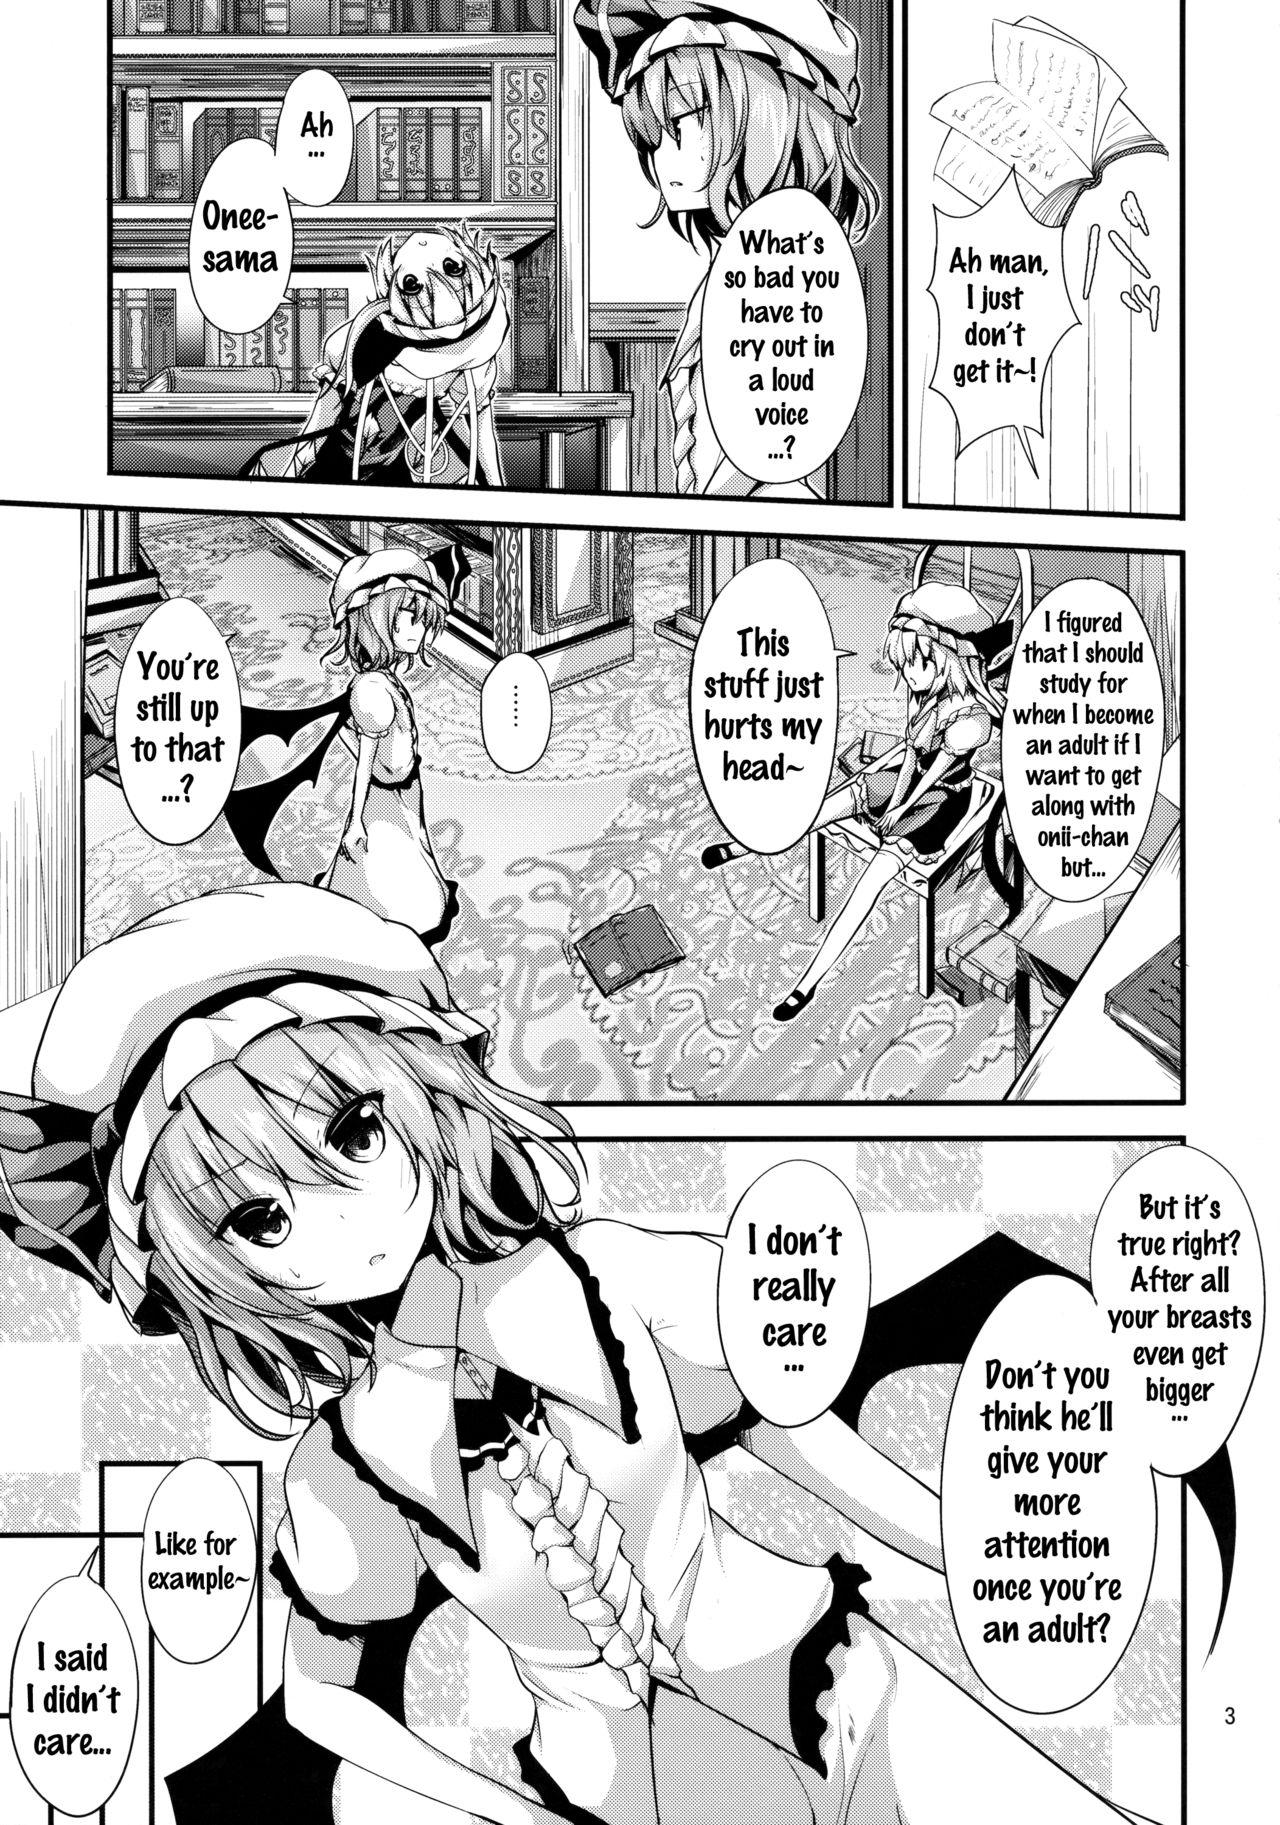 Boys Remi no Motto Otona ni Narumon! | Remi's Becoming More of An Adult! - Touhou project Gay Party - Page 2